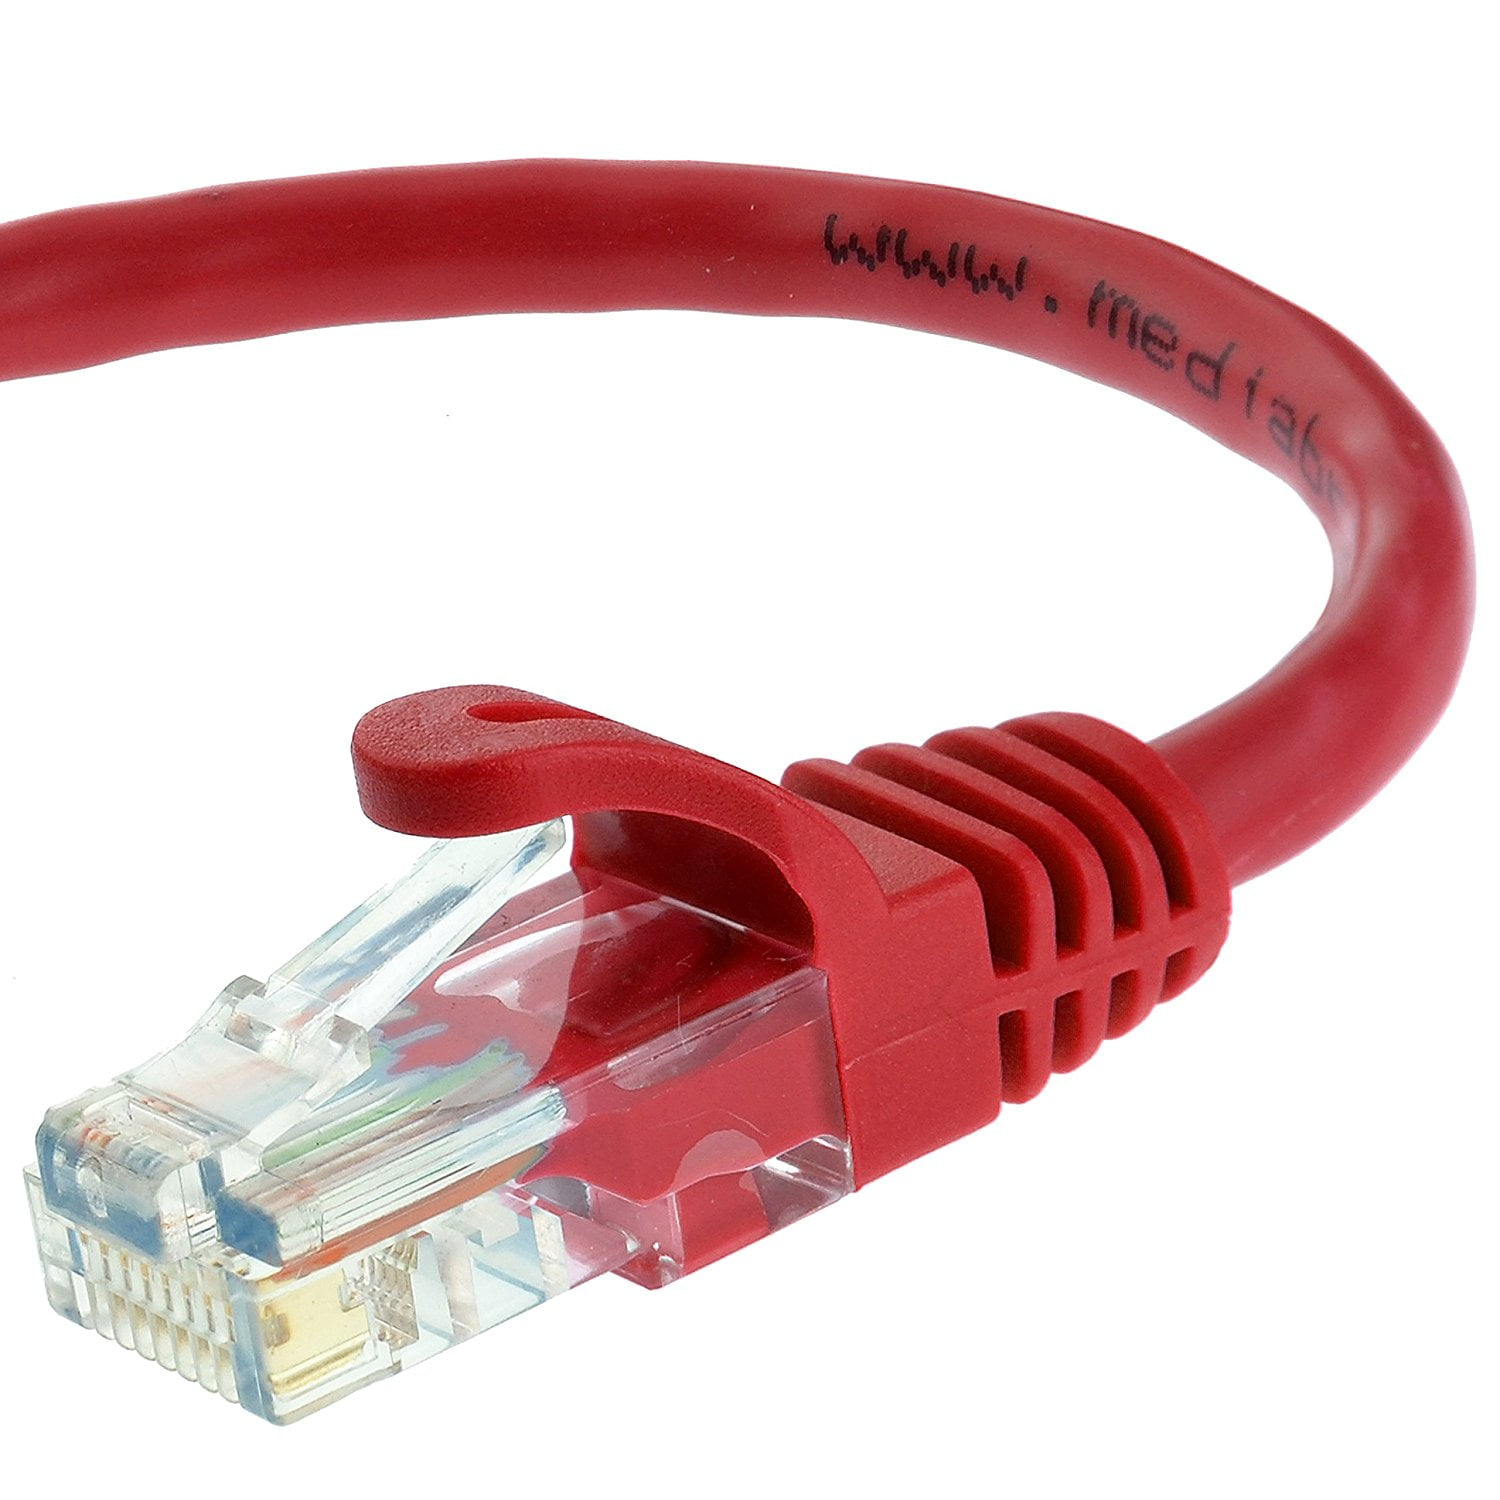 ADI PRO WBXC6ERD2MP5 CAT6e Patch Cable, RJ45, 2m, Red, 5-Pack